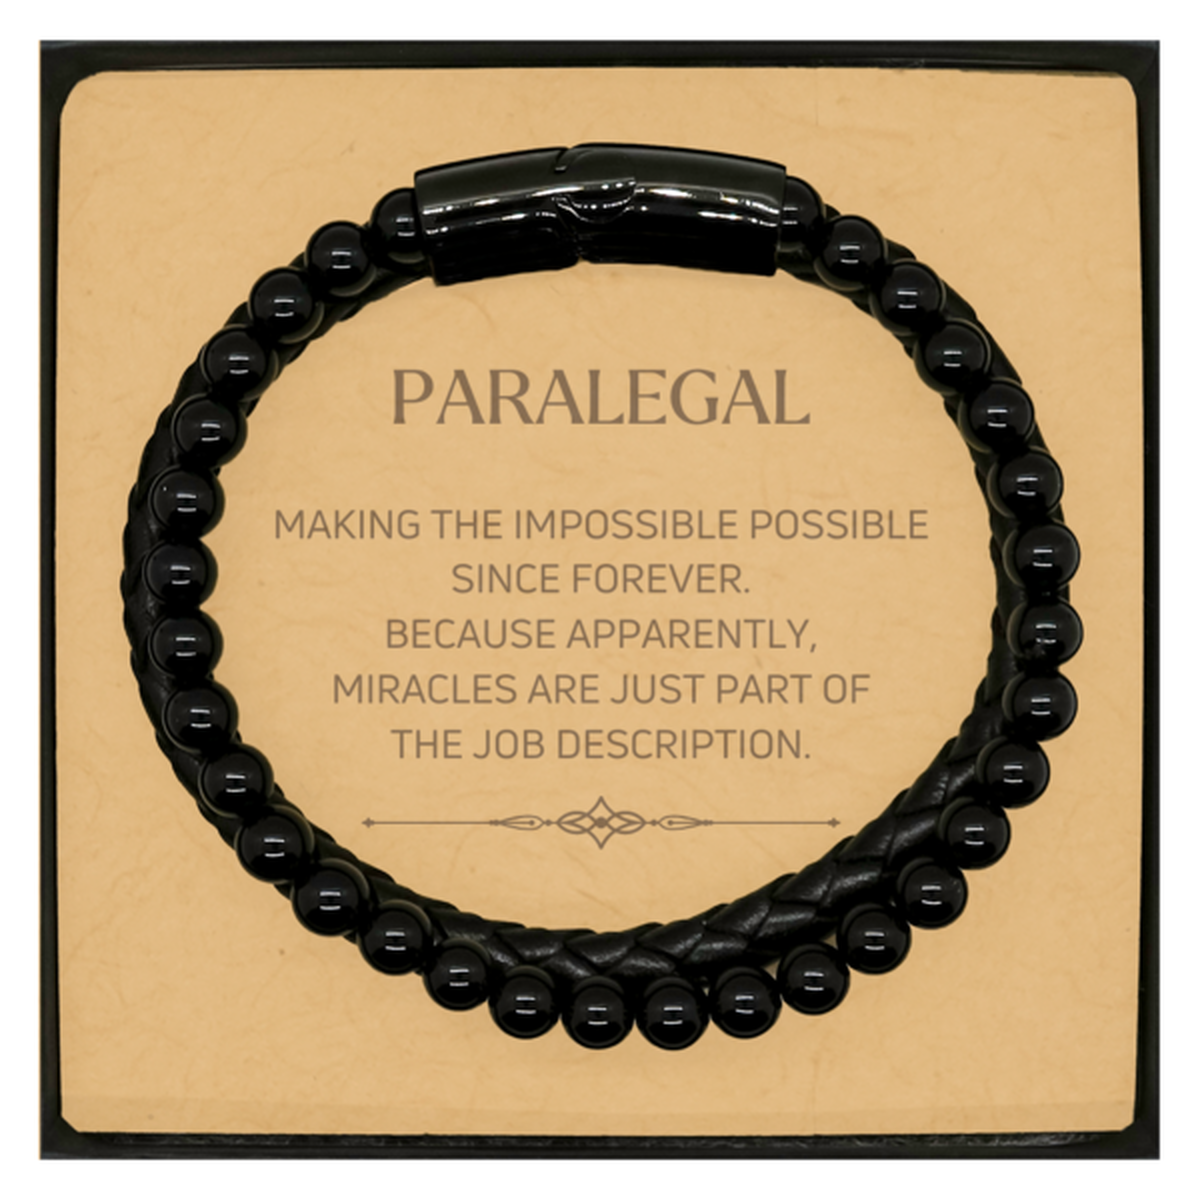 Funny Paralegal Gifts, Miracles are just part of the job description, Inspirational Birthday Christmas Stone Leather Bracelets For Paralegal, Men, Women, Coworkers, Friends, Boss